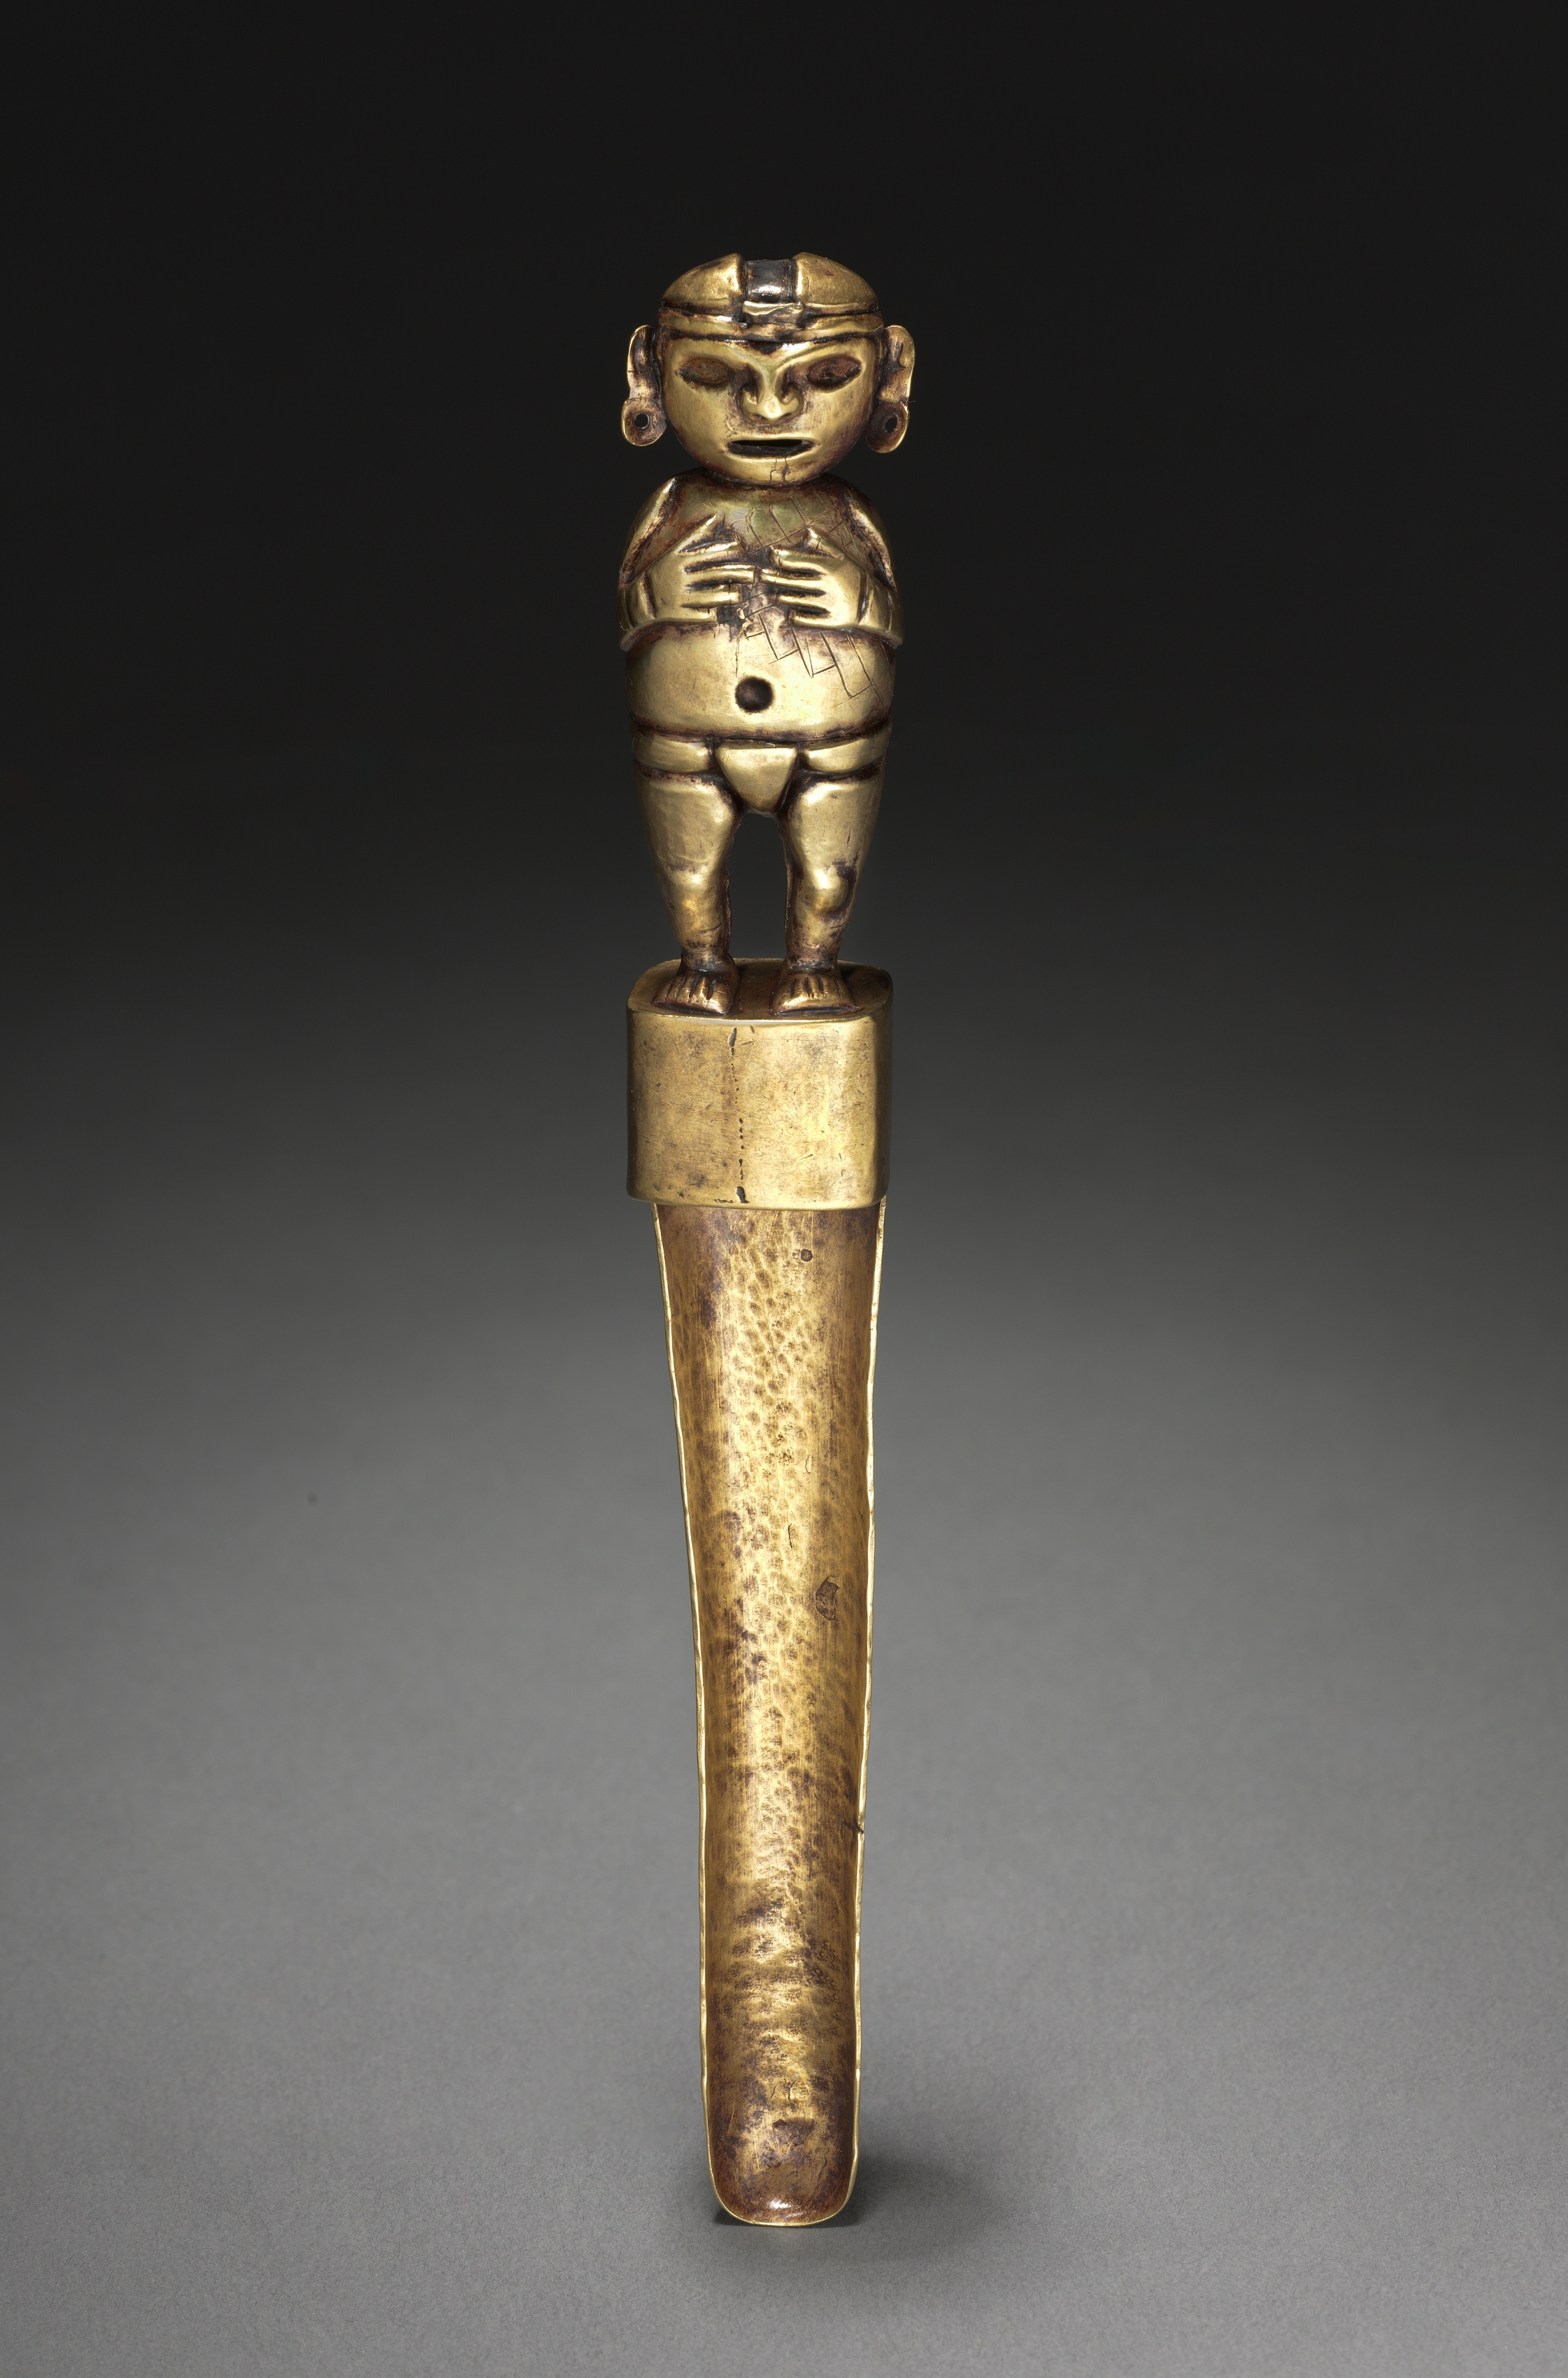 Spoon with Human Figure